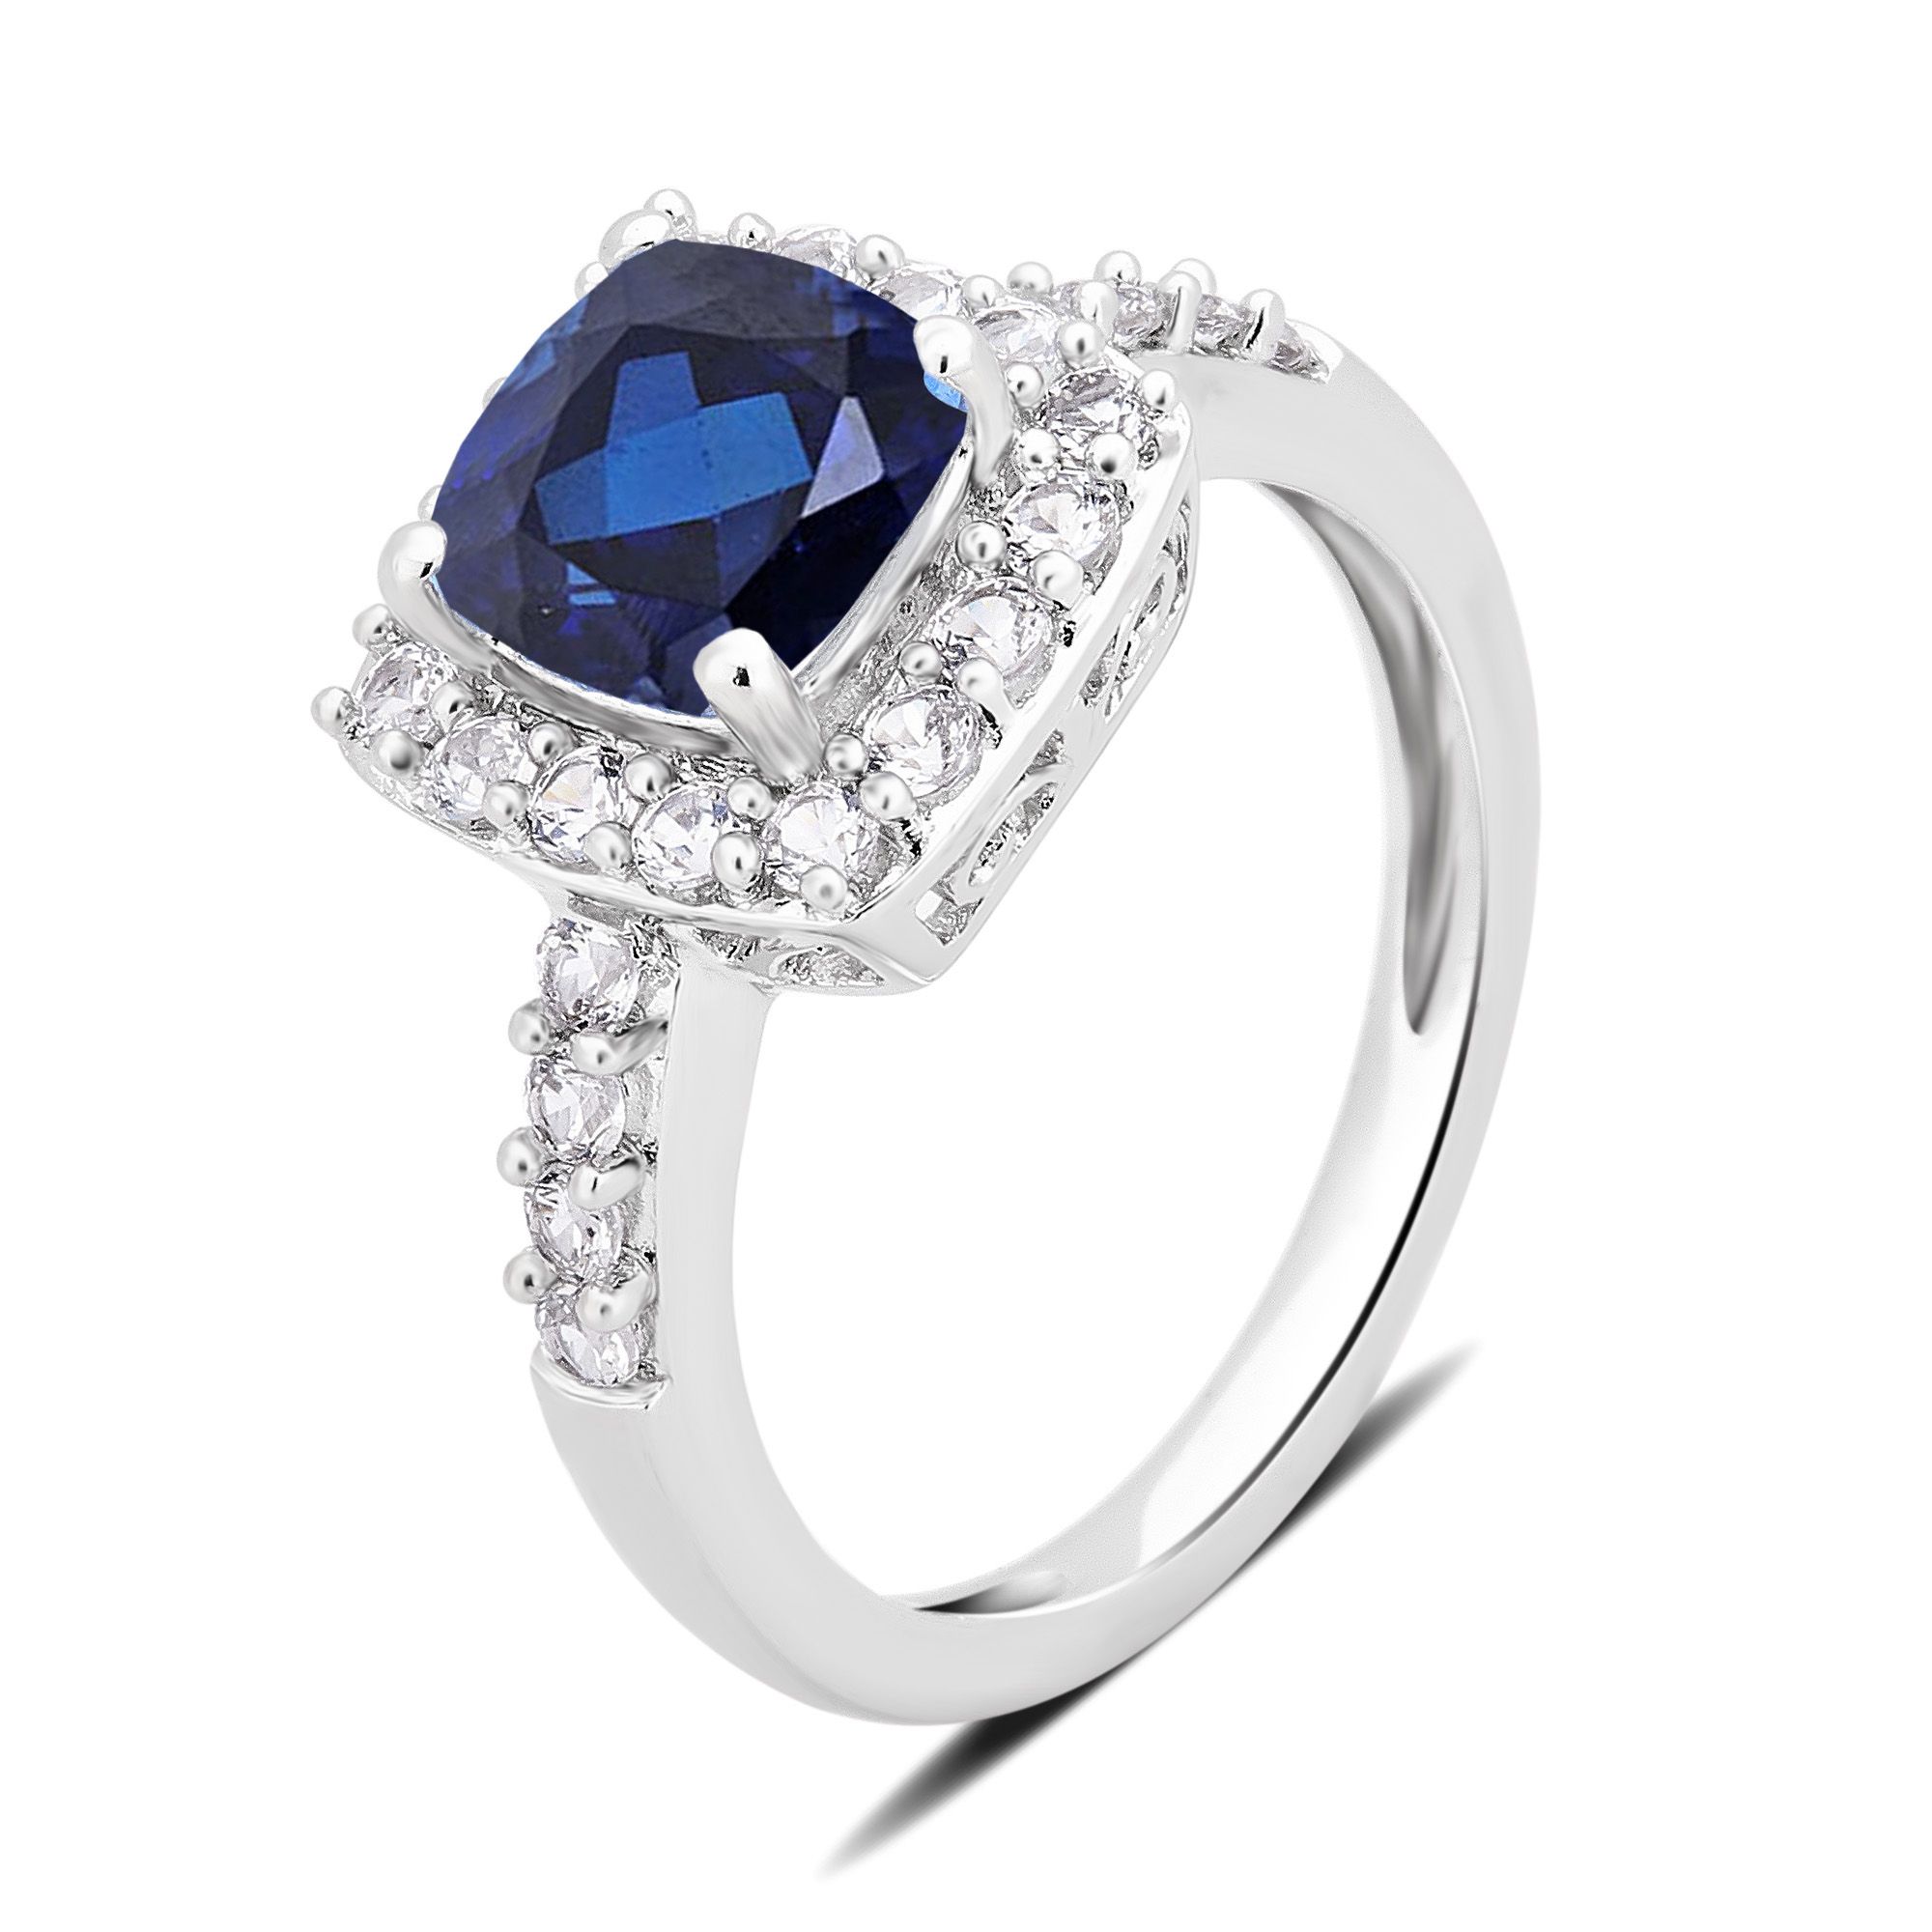 1.50 ct. t.w. Blue Diamond and White Sapphire Ring in Sterling Silver